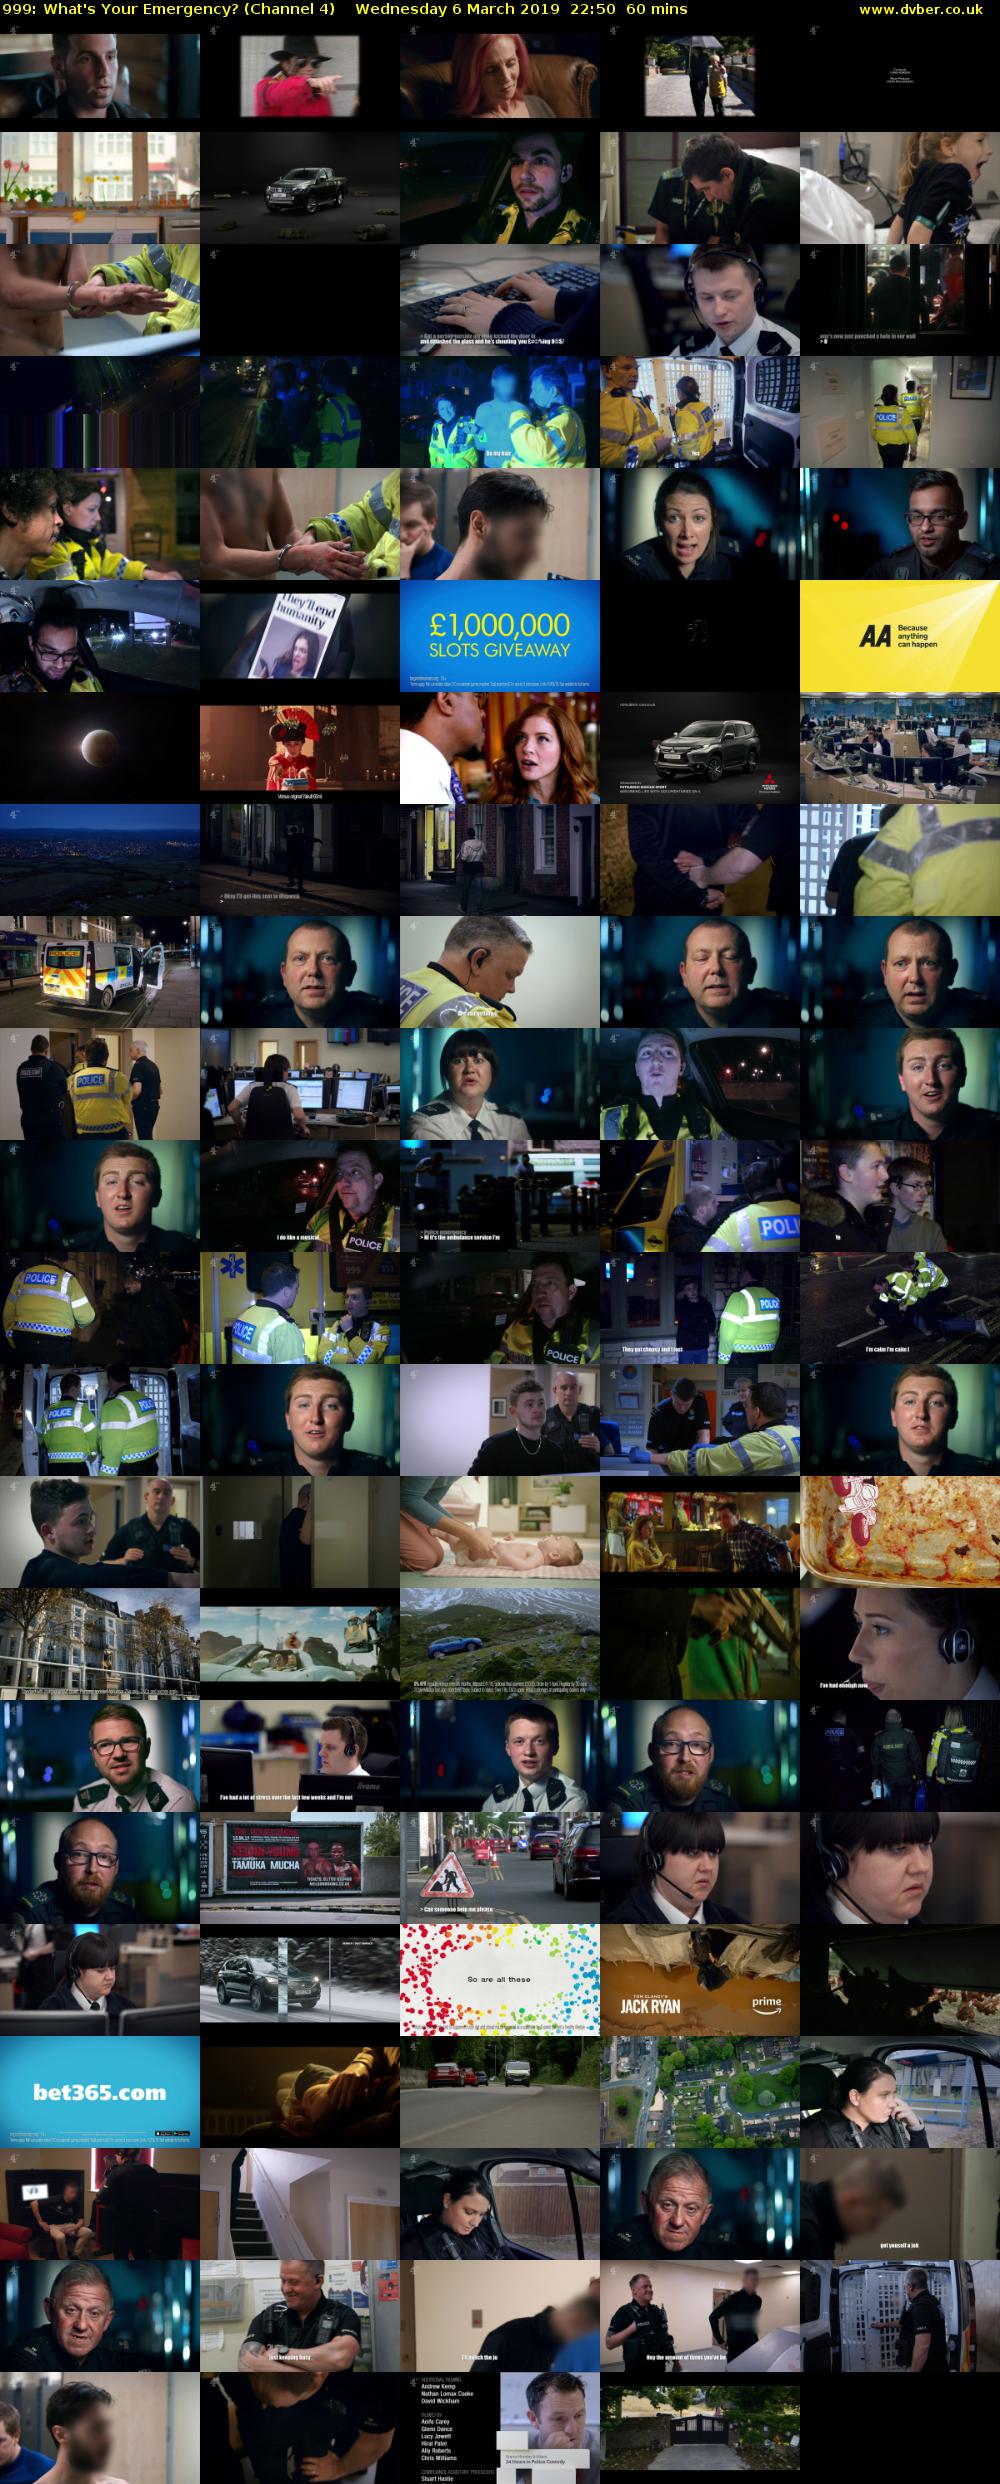 999: What's Your Emergency? (Channel 4) Wednesday 6 March 2019 22:50 - 23:50